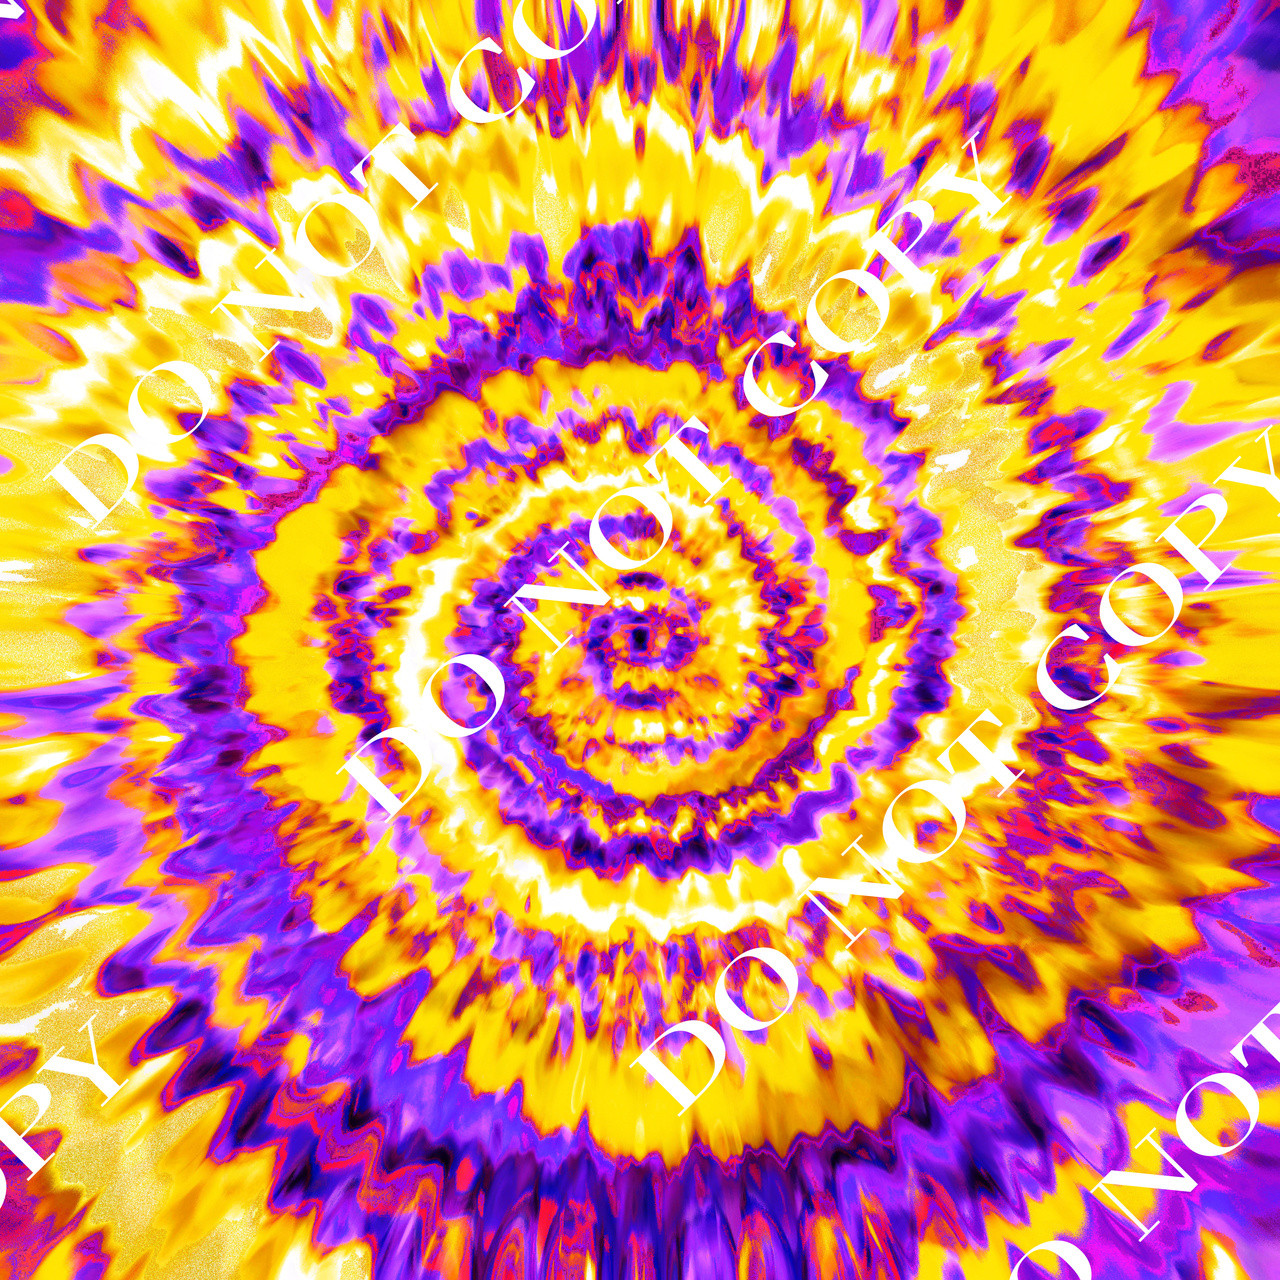 AWTF TieDye18 Purple and Gold